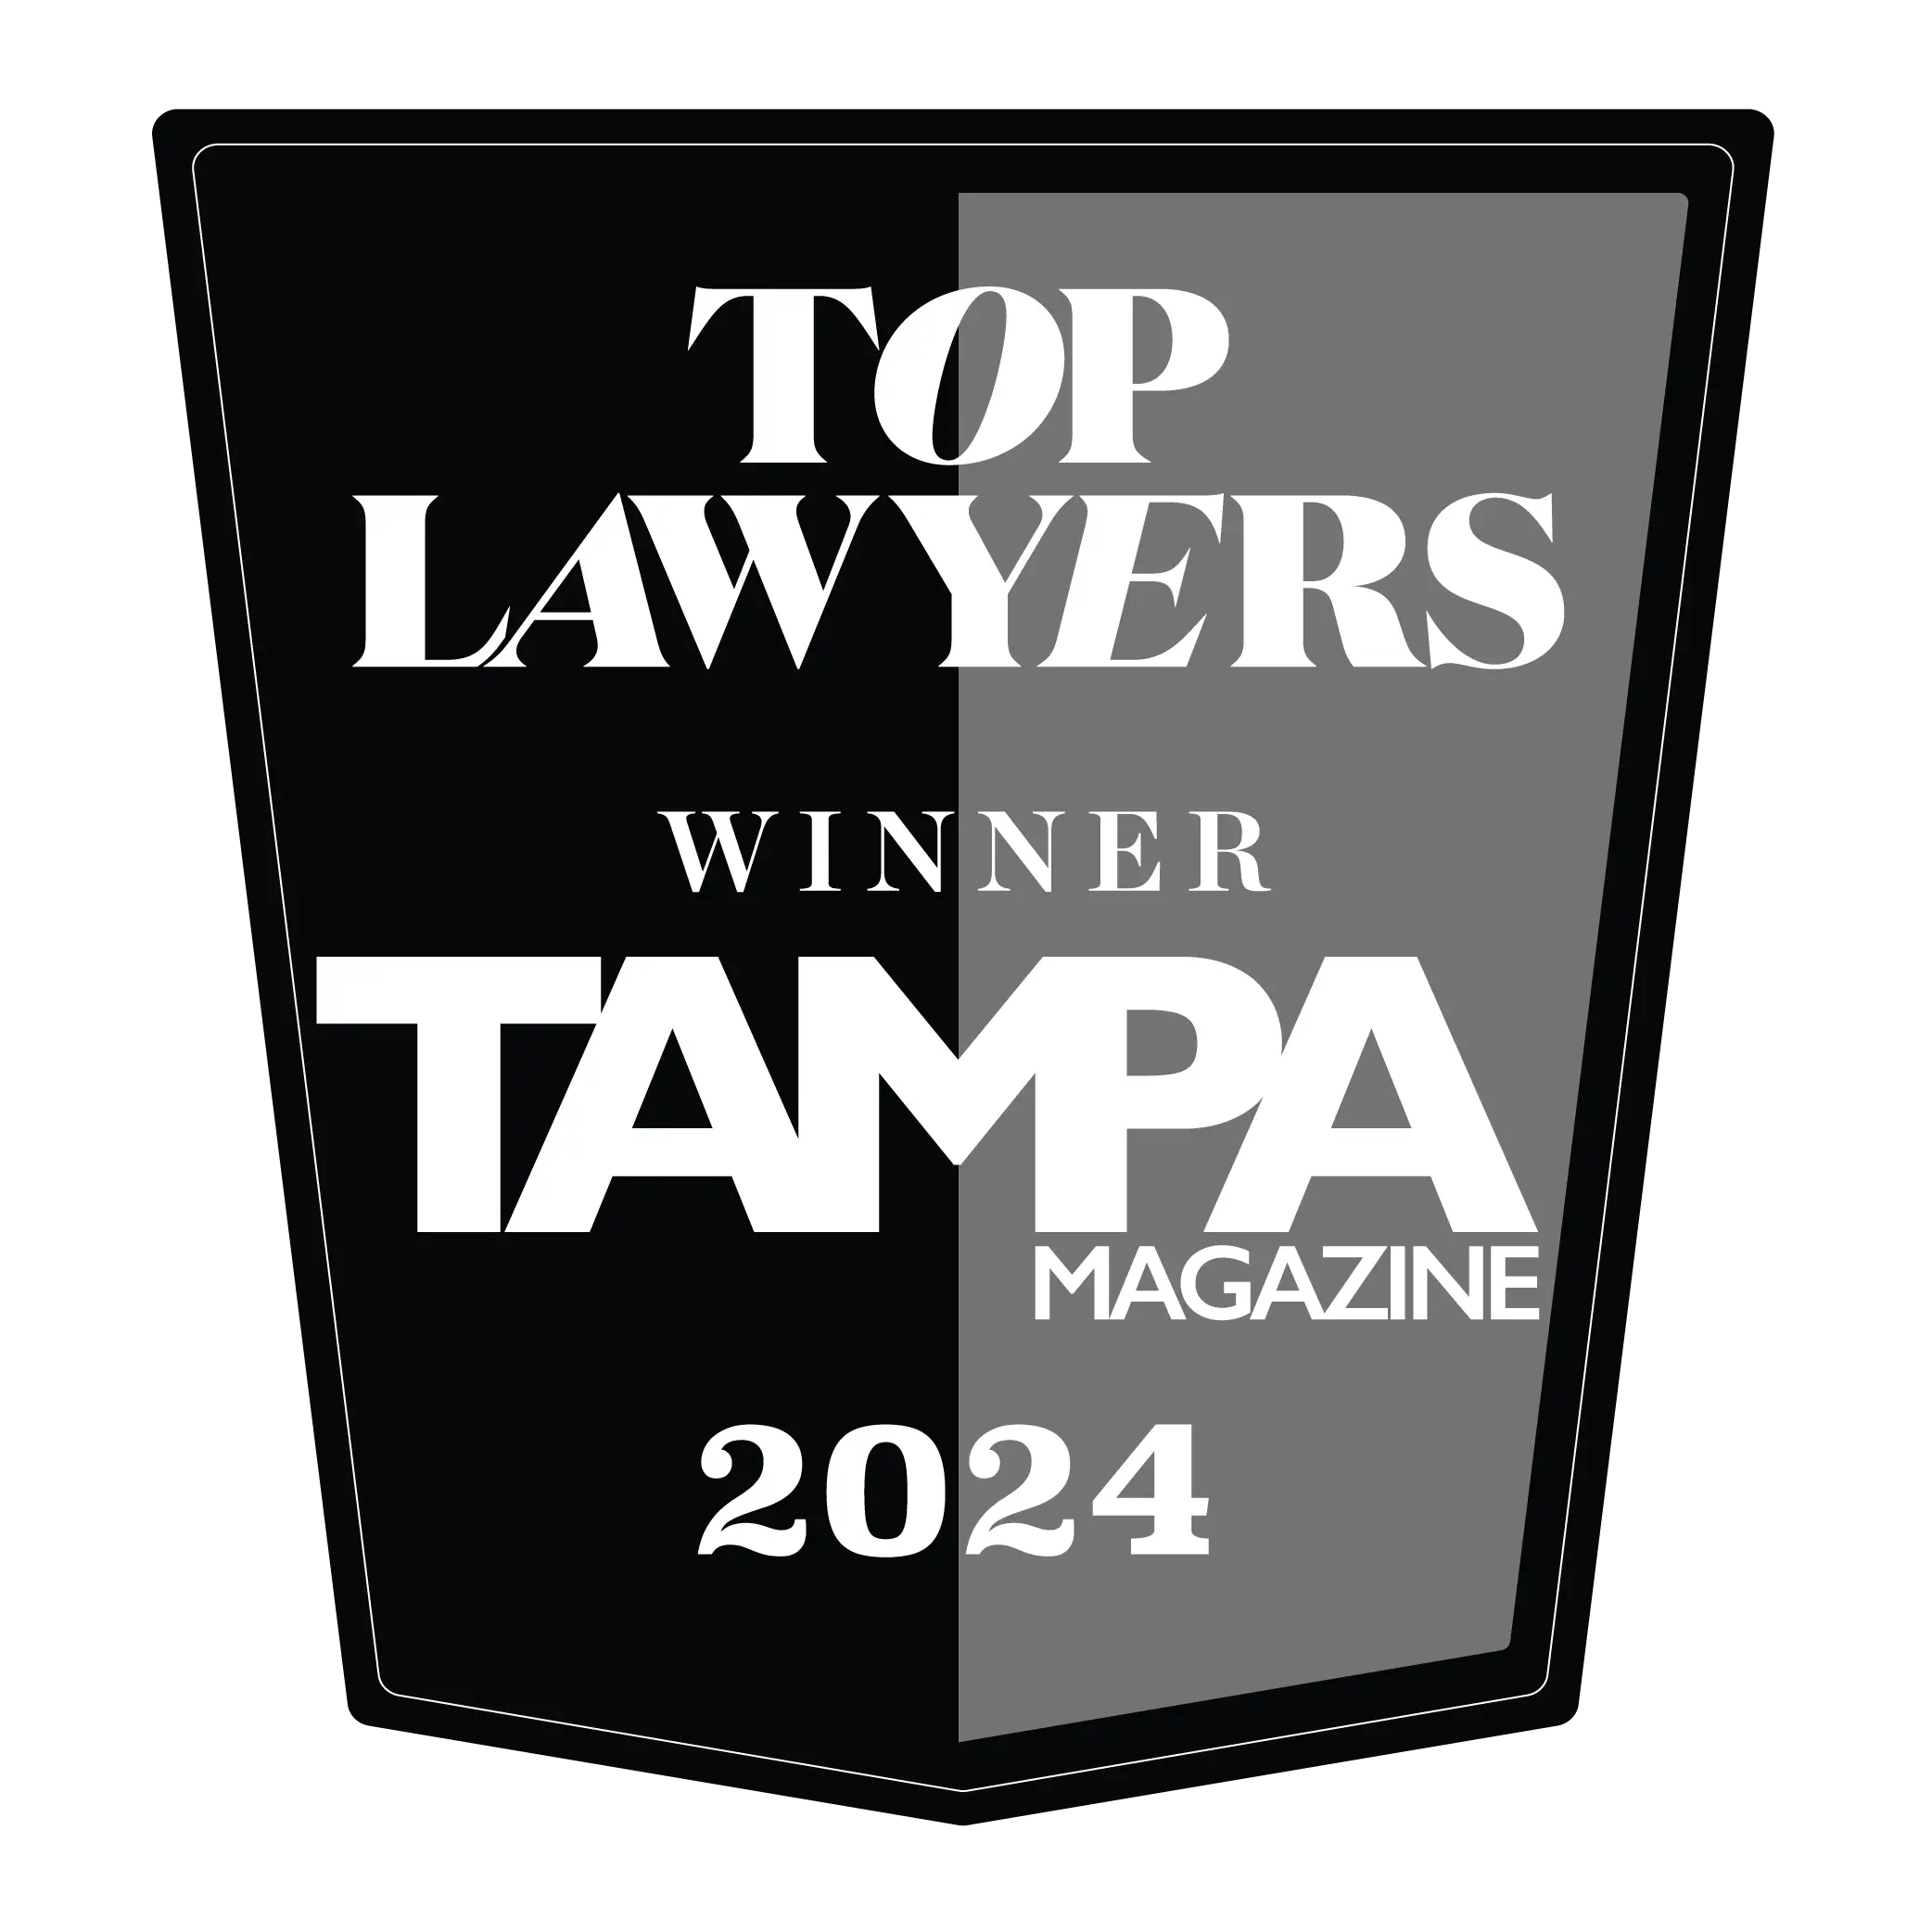 Badge denoting status as Top Lawyers of 2024 winner from Tampa Magazine